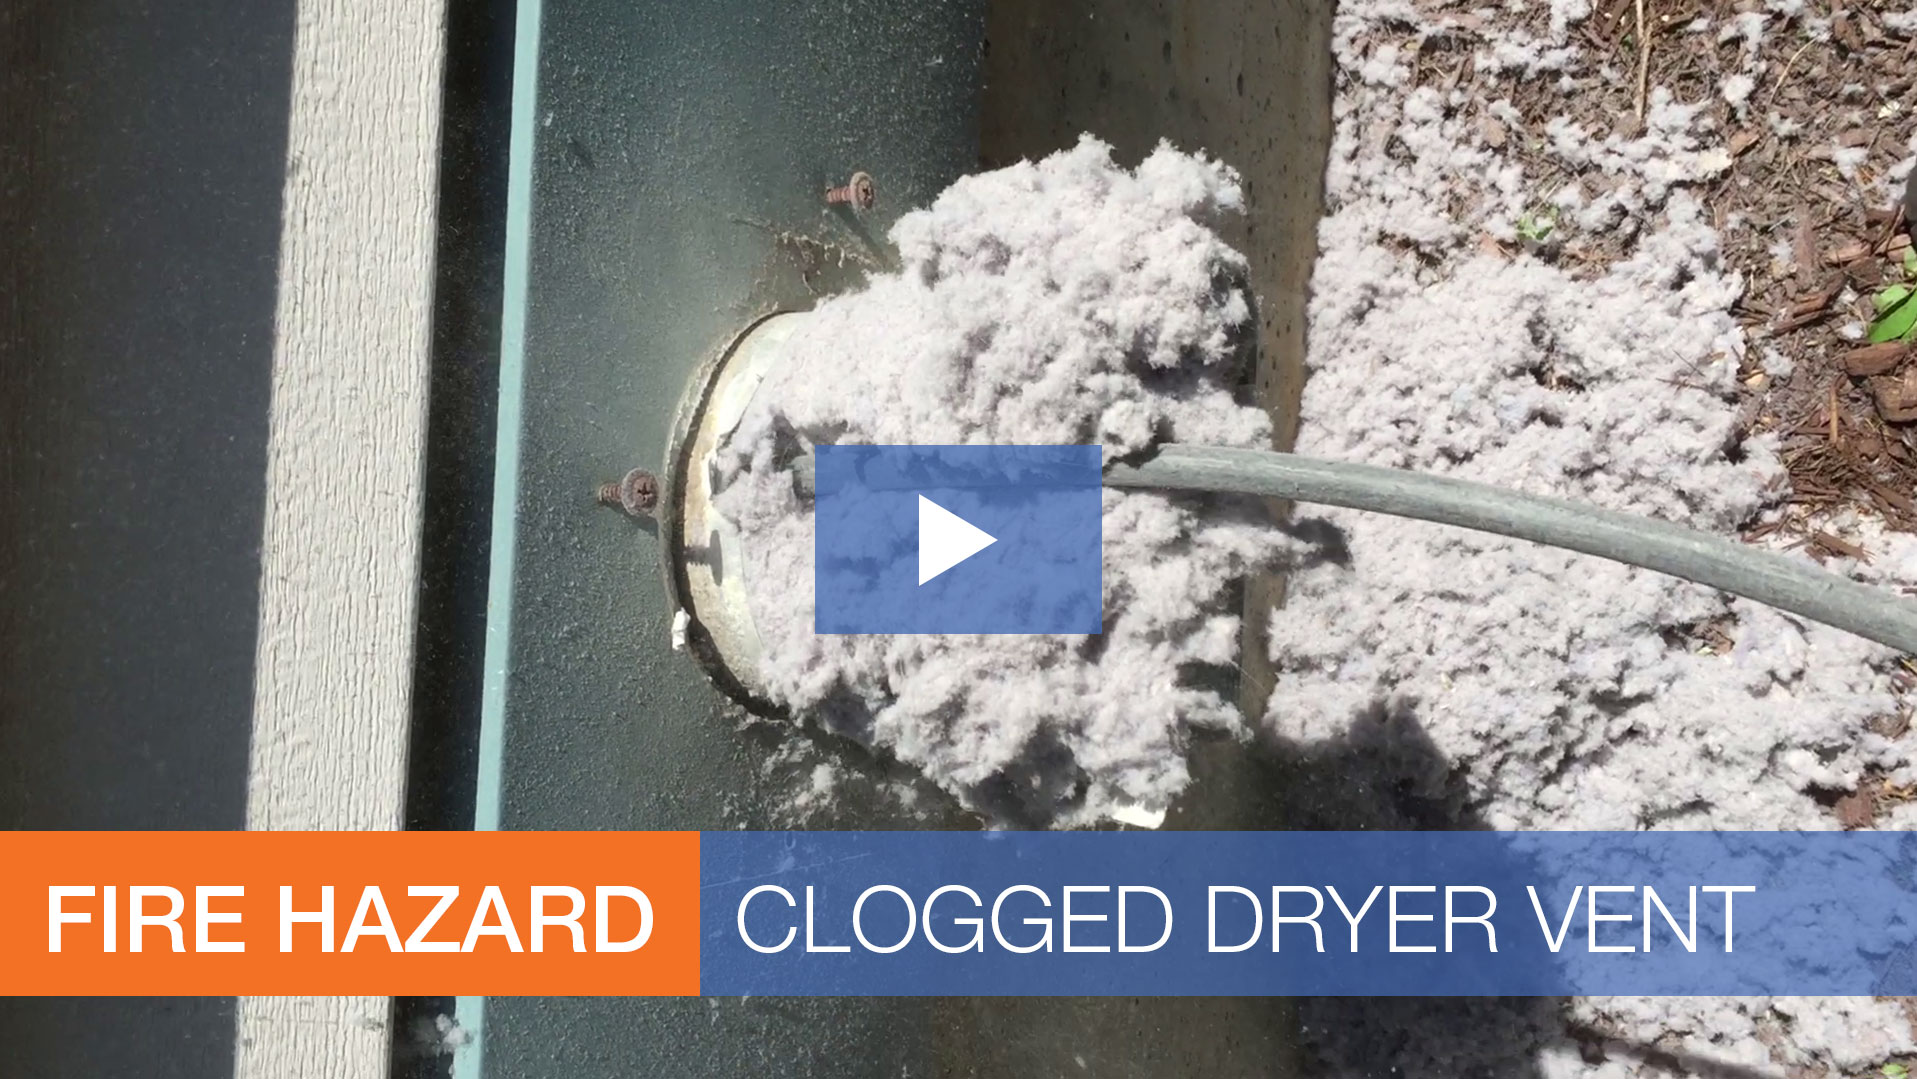 Video:  Severely Clogged Dryer Vent - Extreme Lint Build-Up (FIRE HAZARD) - Technician's POV CAM